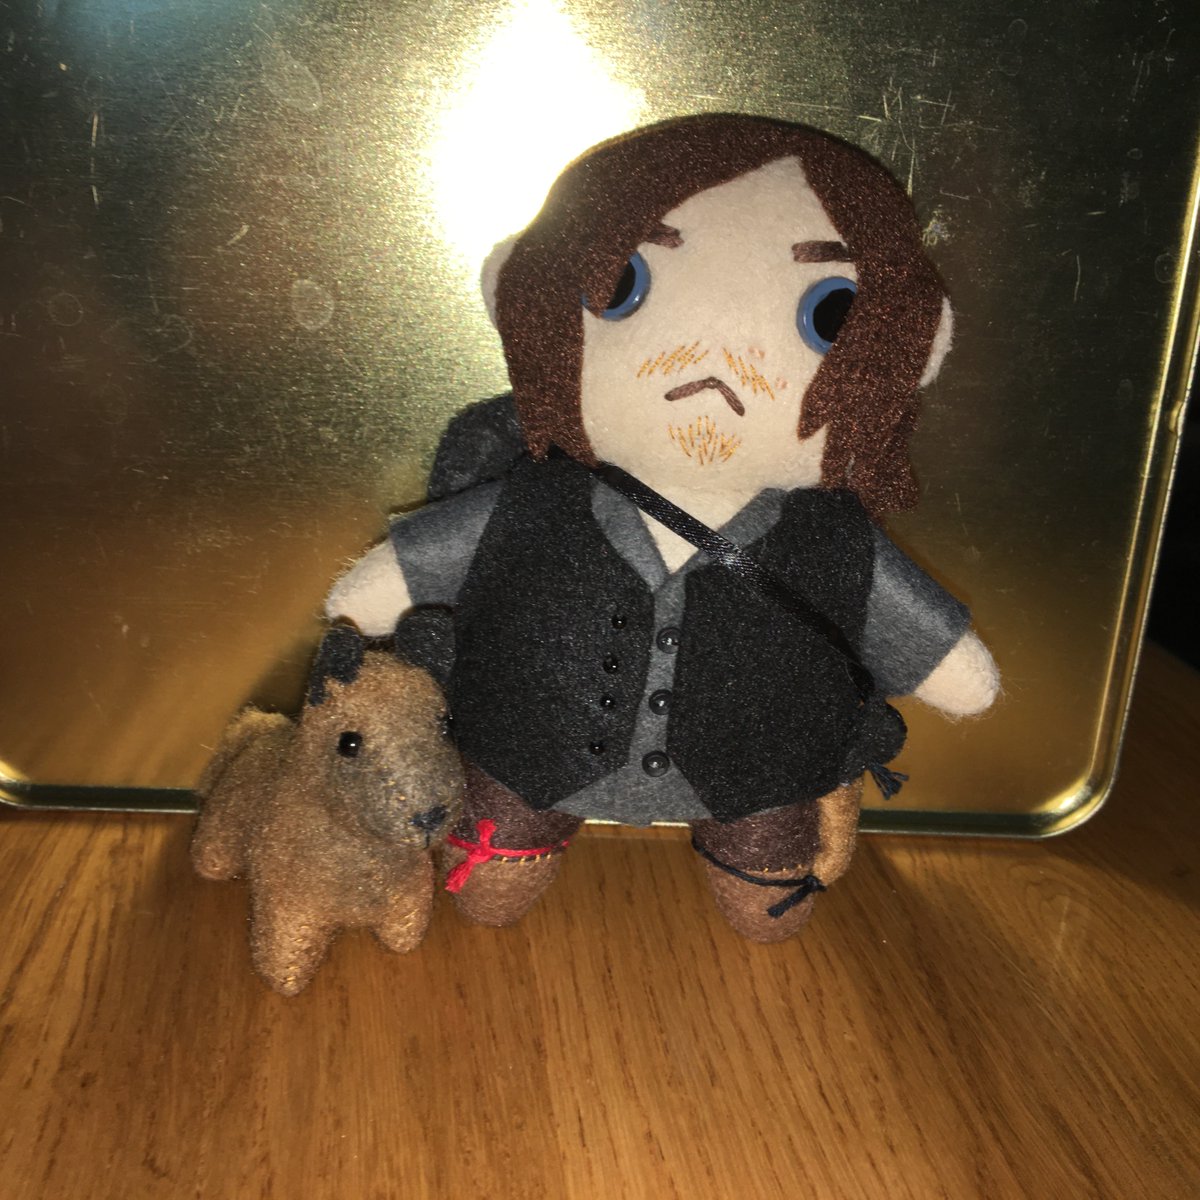 Hey Everybody! HEY HEY! I have just received one of the coolest freaking things EVER and I really really want to share please! I ordered a commission from  @DieDarlingsUK for Daryl from The Walking Dead and I have to share a little photo shoot of this beautiful plush! 1/4